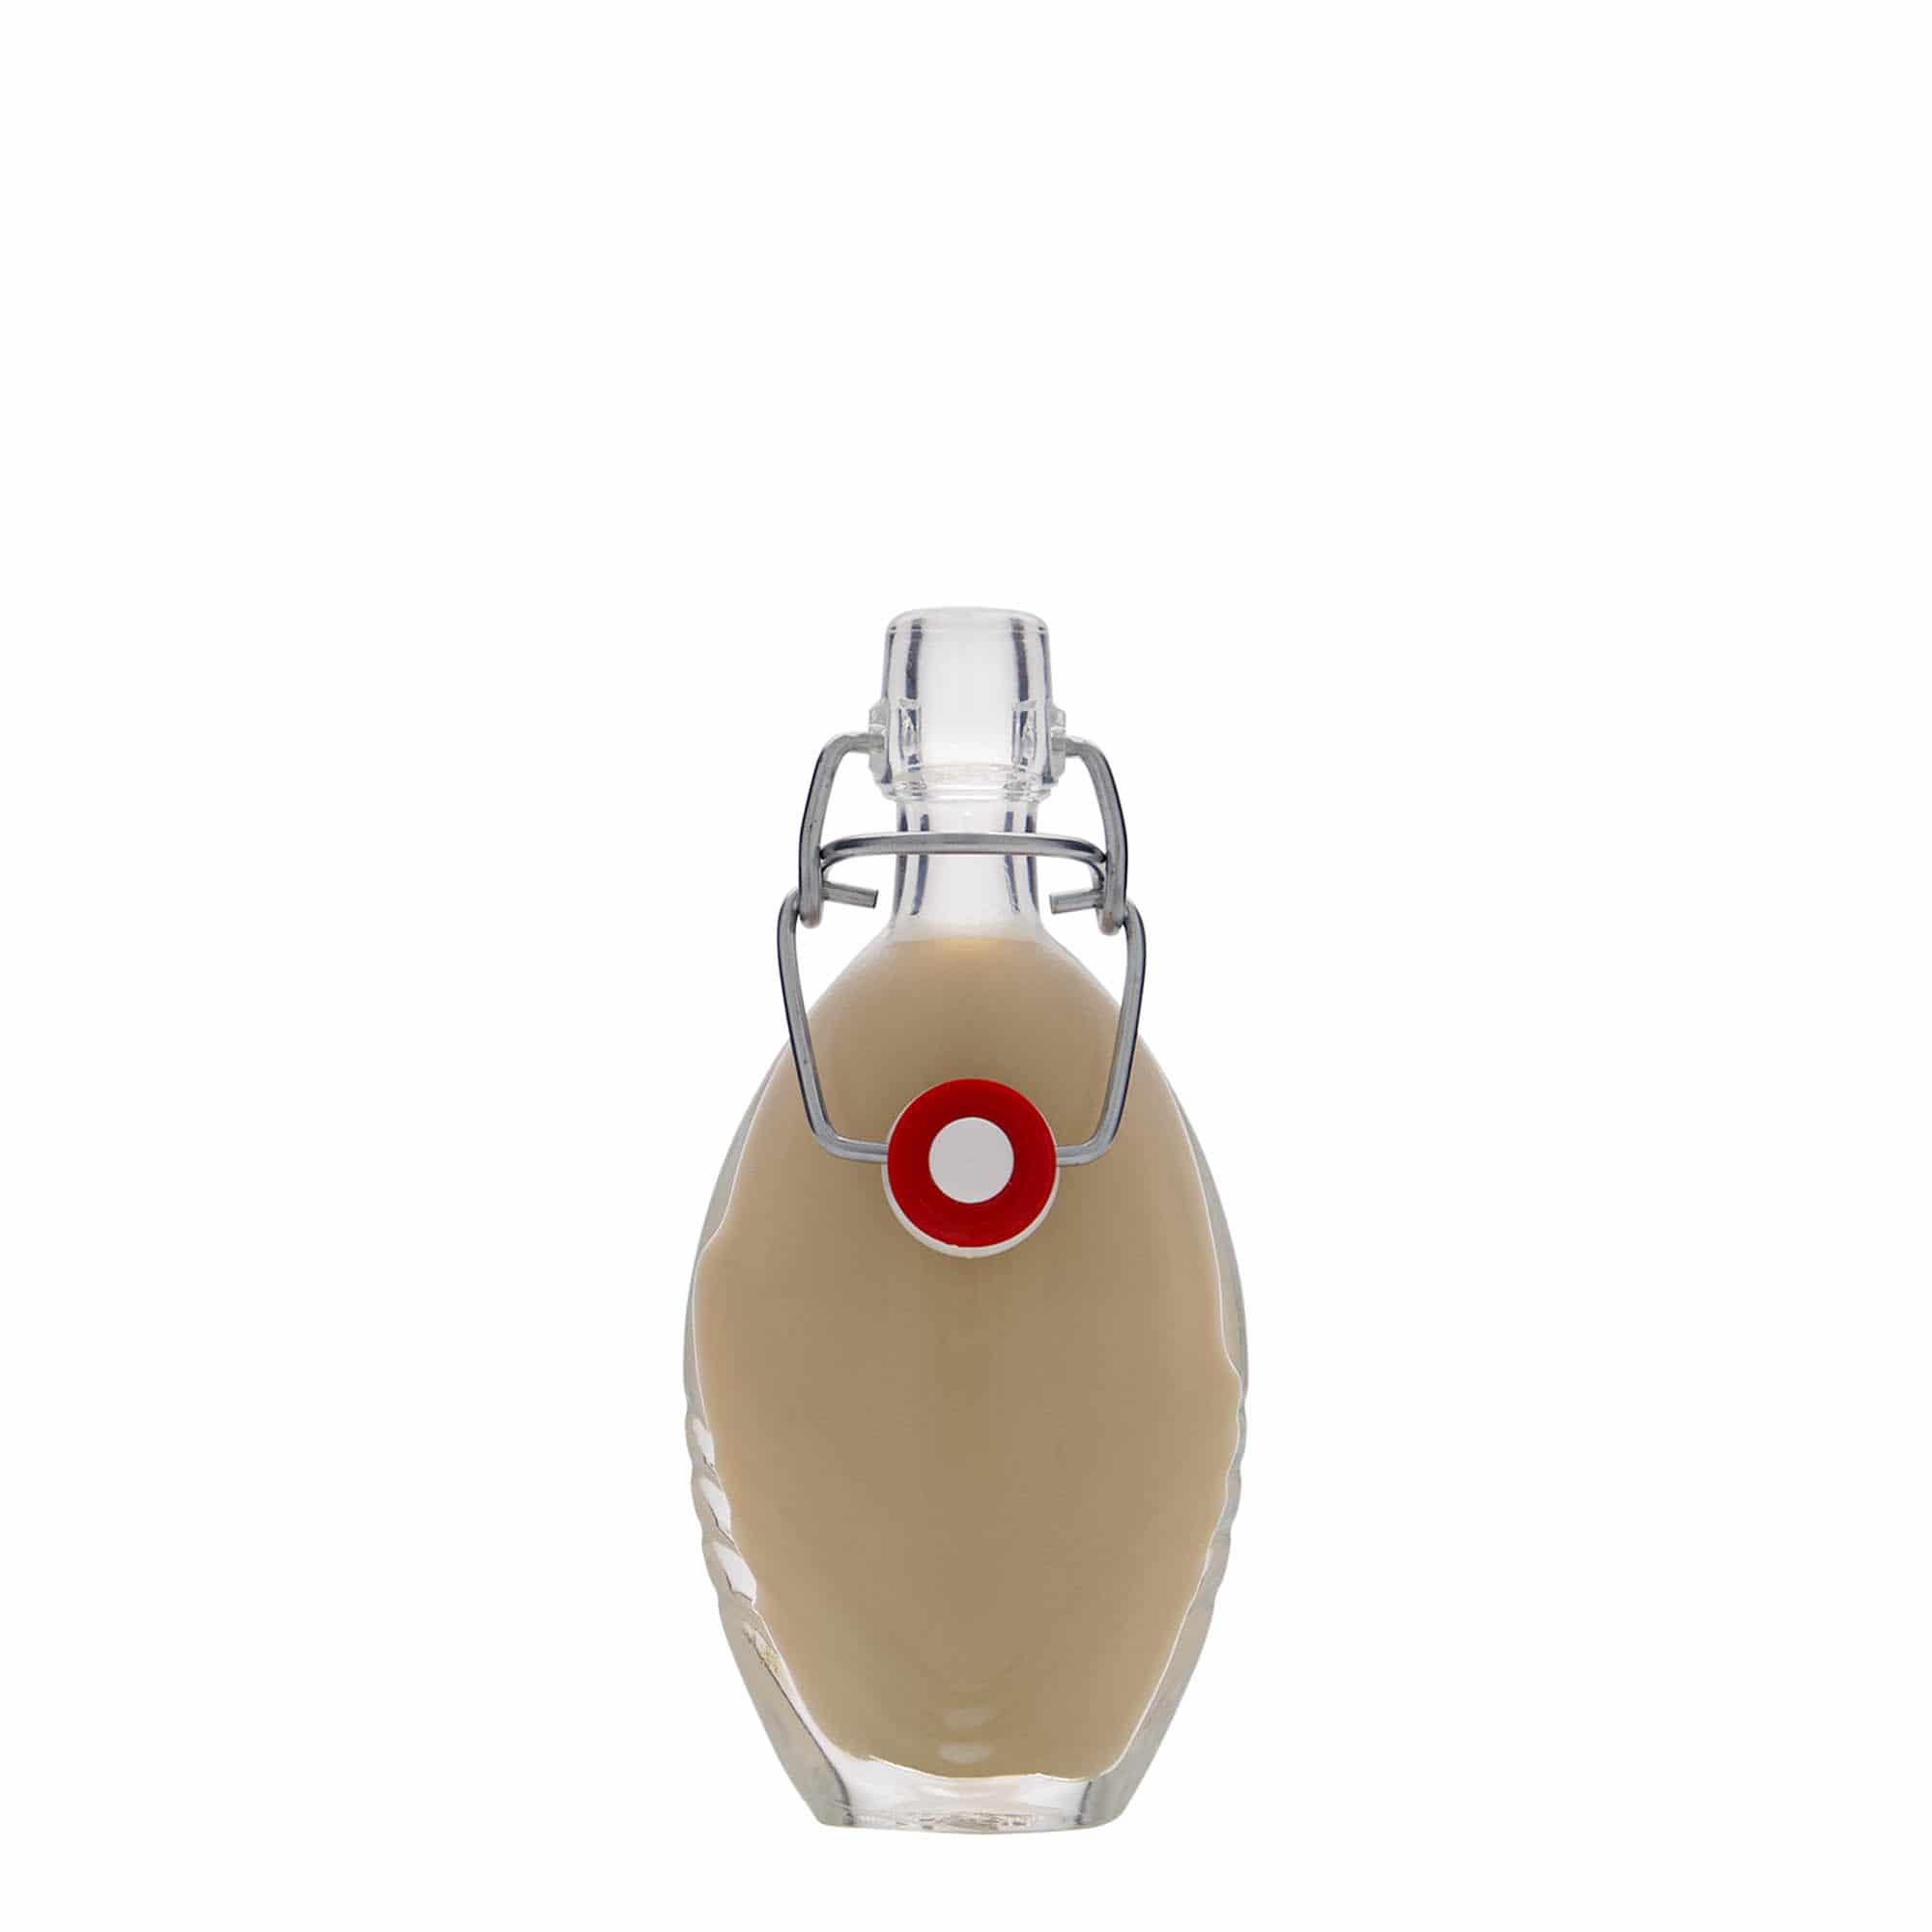 40 ml glass bottle 'Florence', oval, closure: swing top